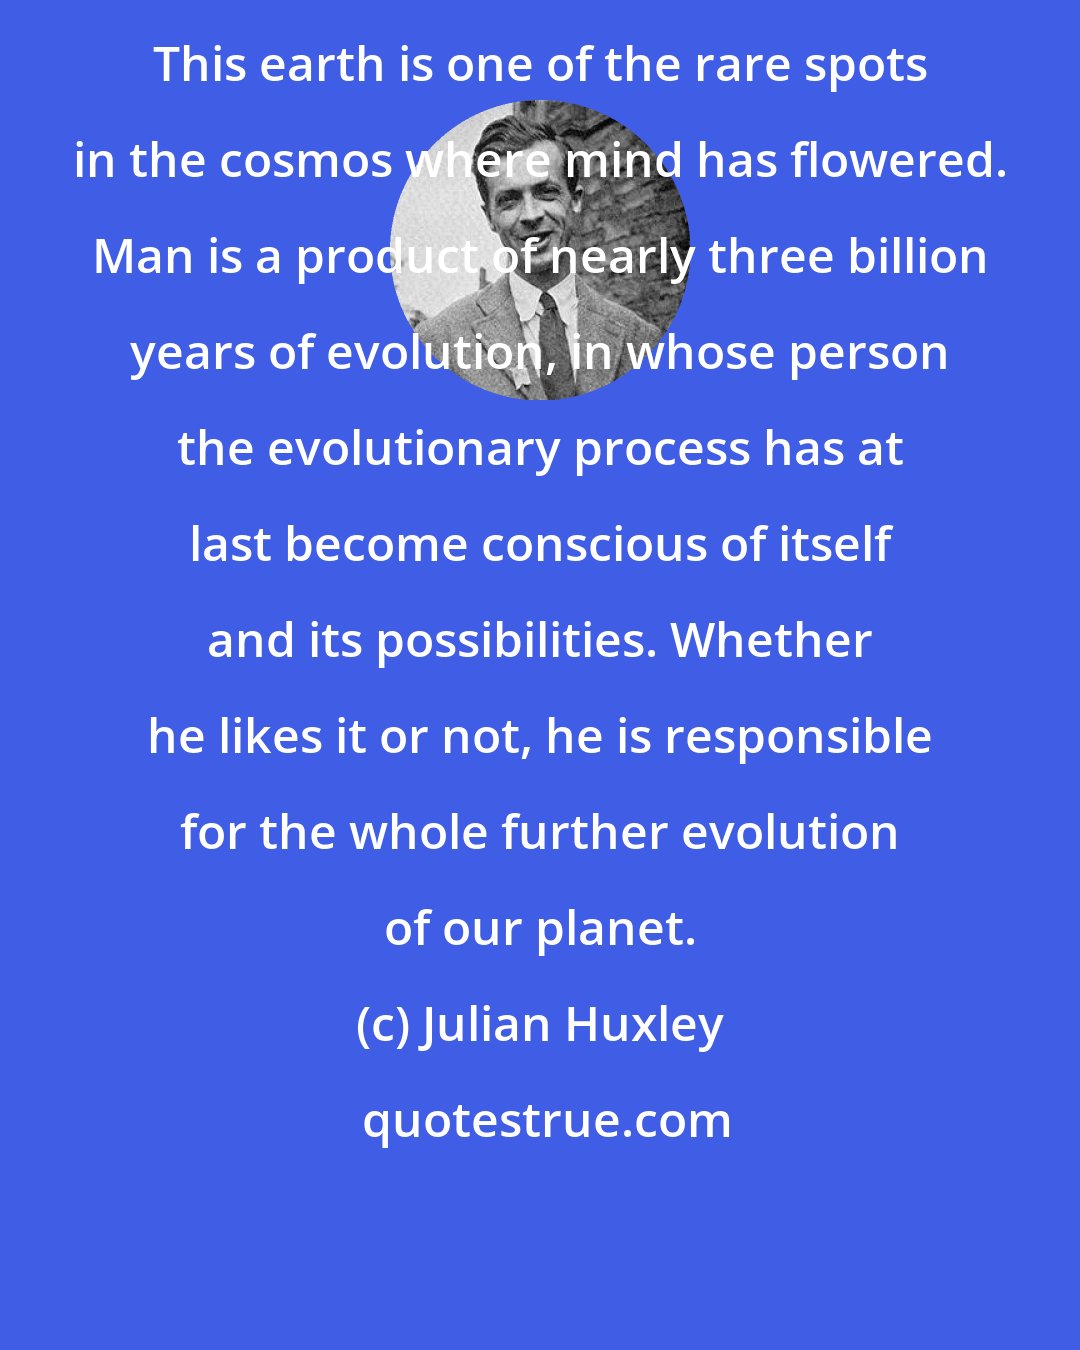 Julian Huxley: This earth is one of the rare spots in the cosmos where mind has flowered. Man is a product of nearly three billion years of evolution, in whose person the evolutionary process has at last become conscious of itself and its possibilities. Whether he likes it or not, he is responsible for the whole further evolution of our planet.